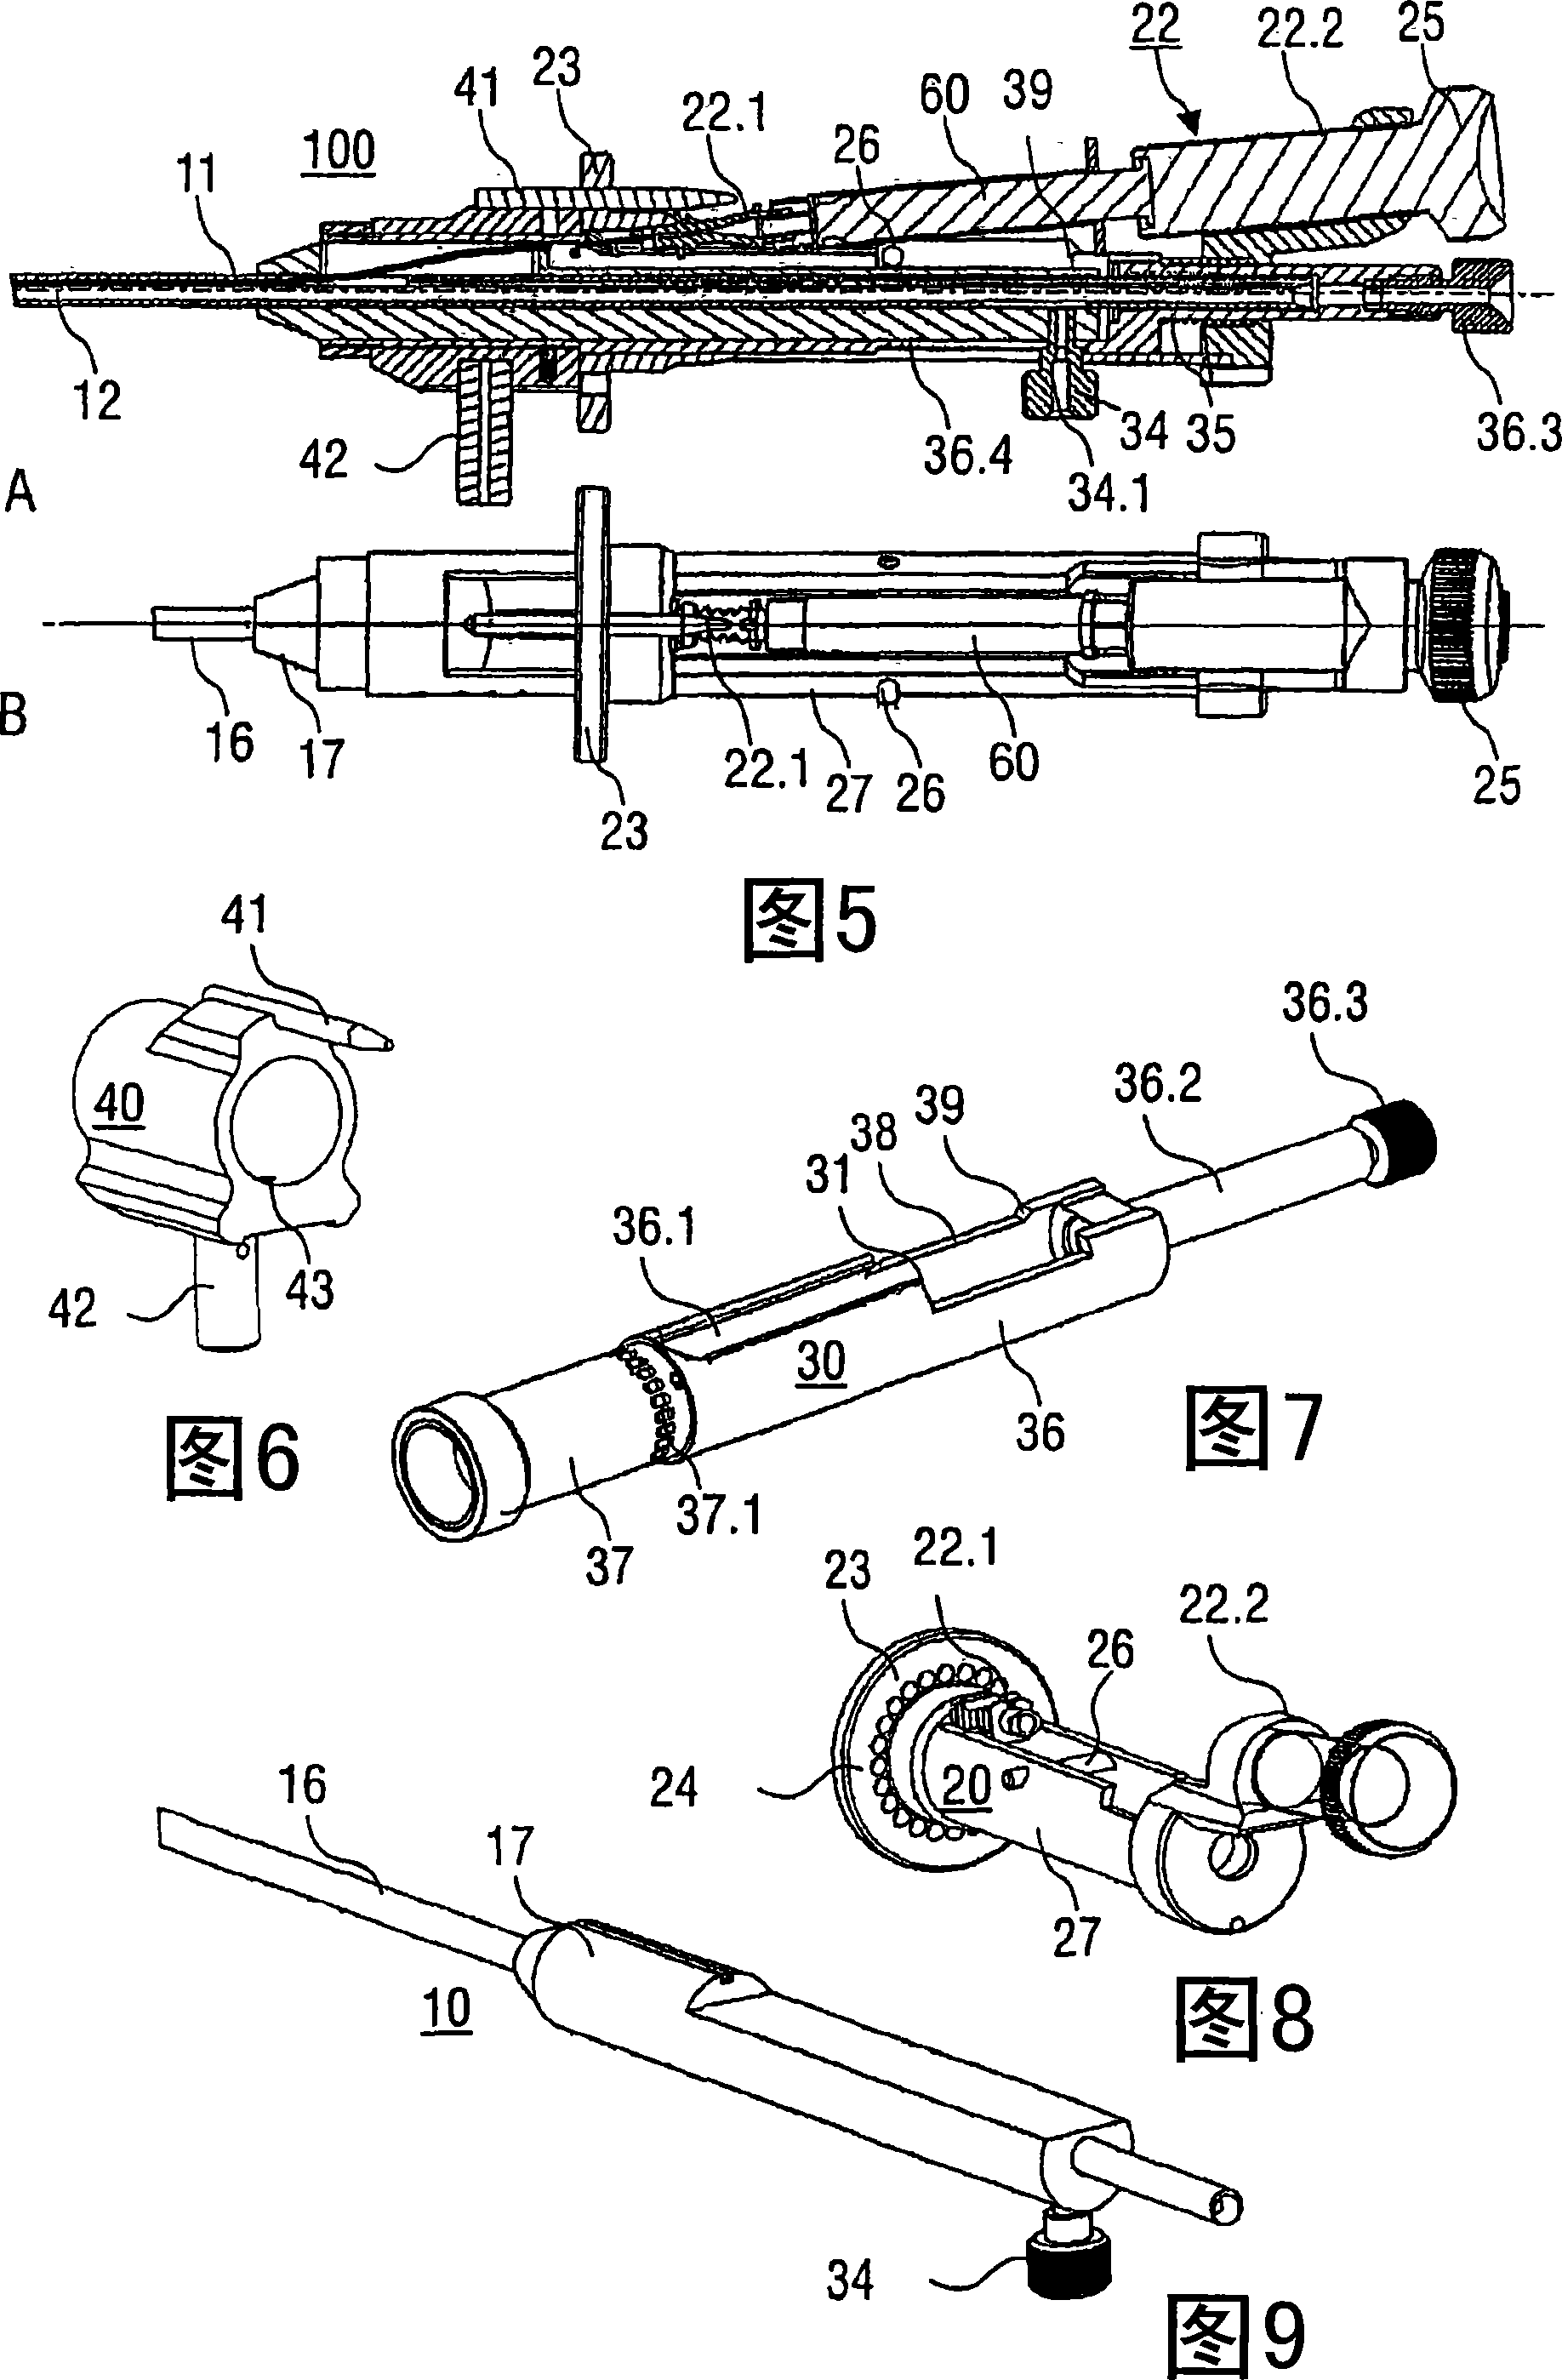 Injection appliance and method